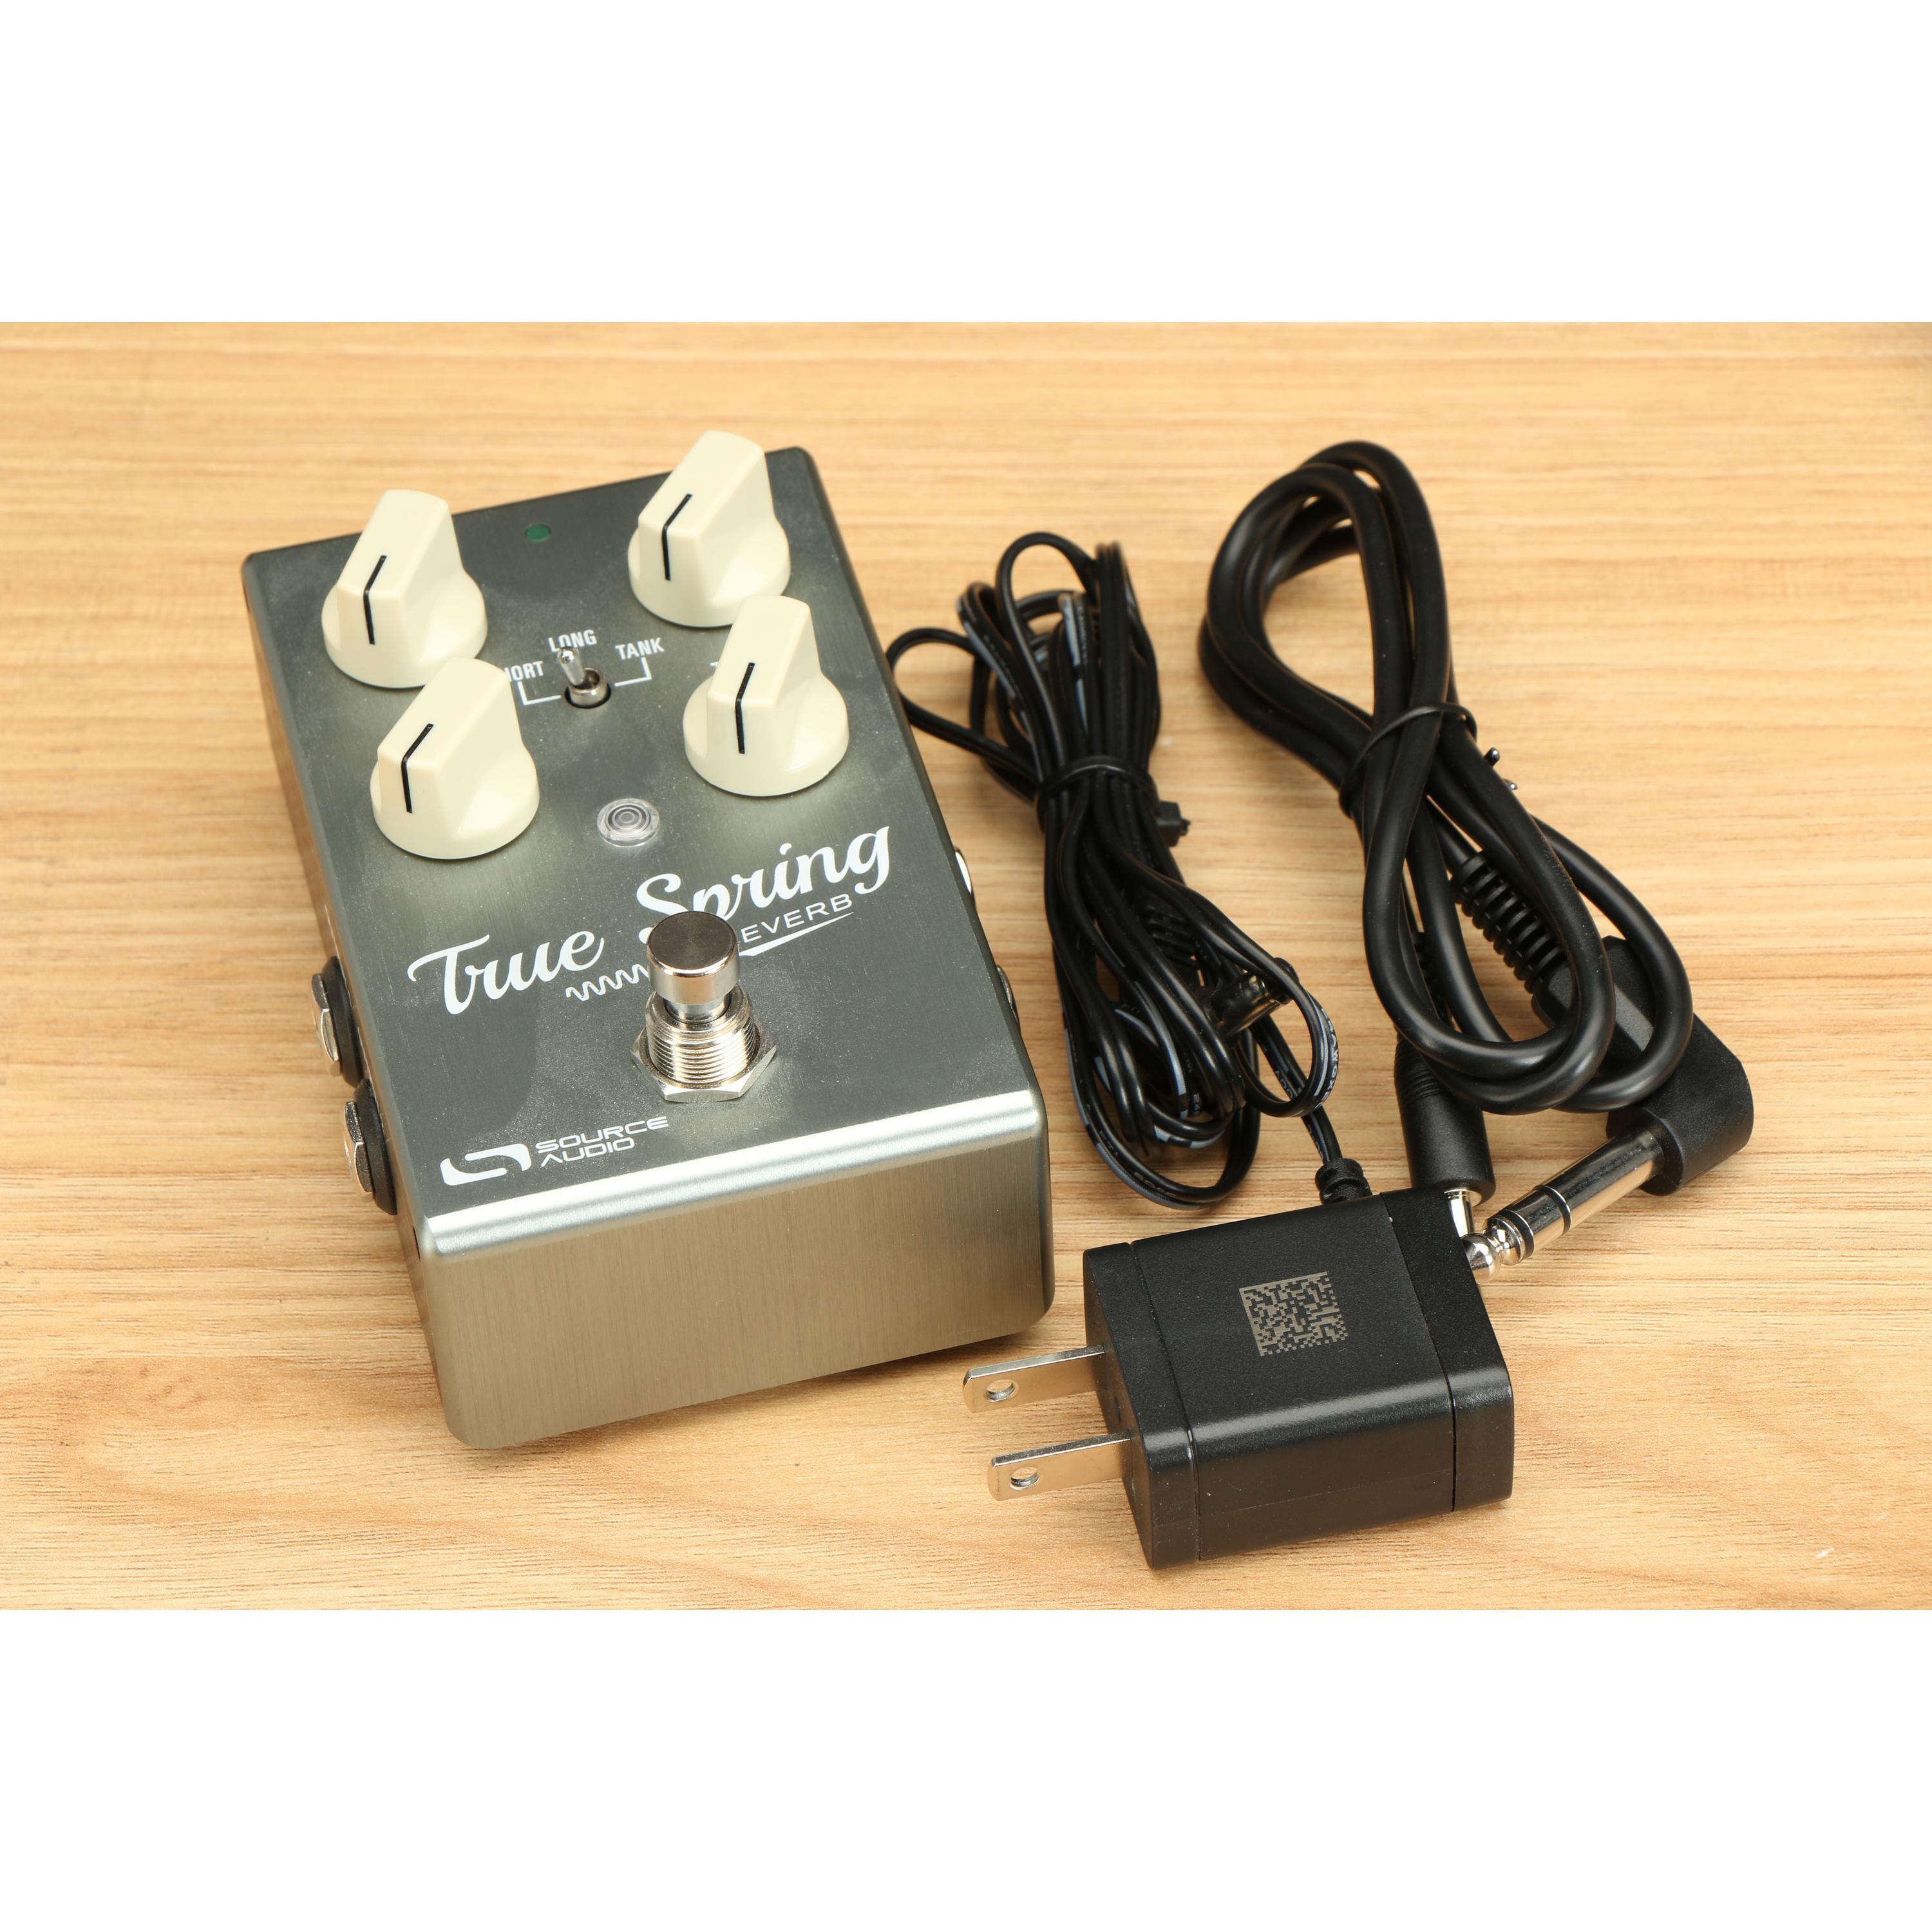 Used Source Audio True Spring Reverb - Sweetwater's Gear Exchange